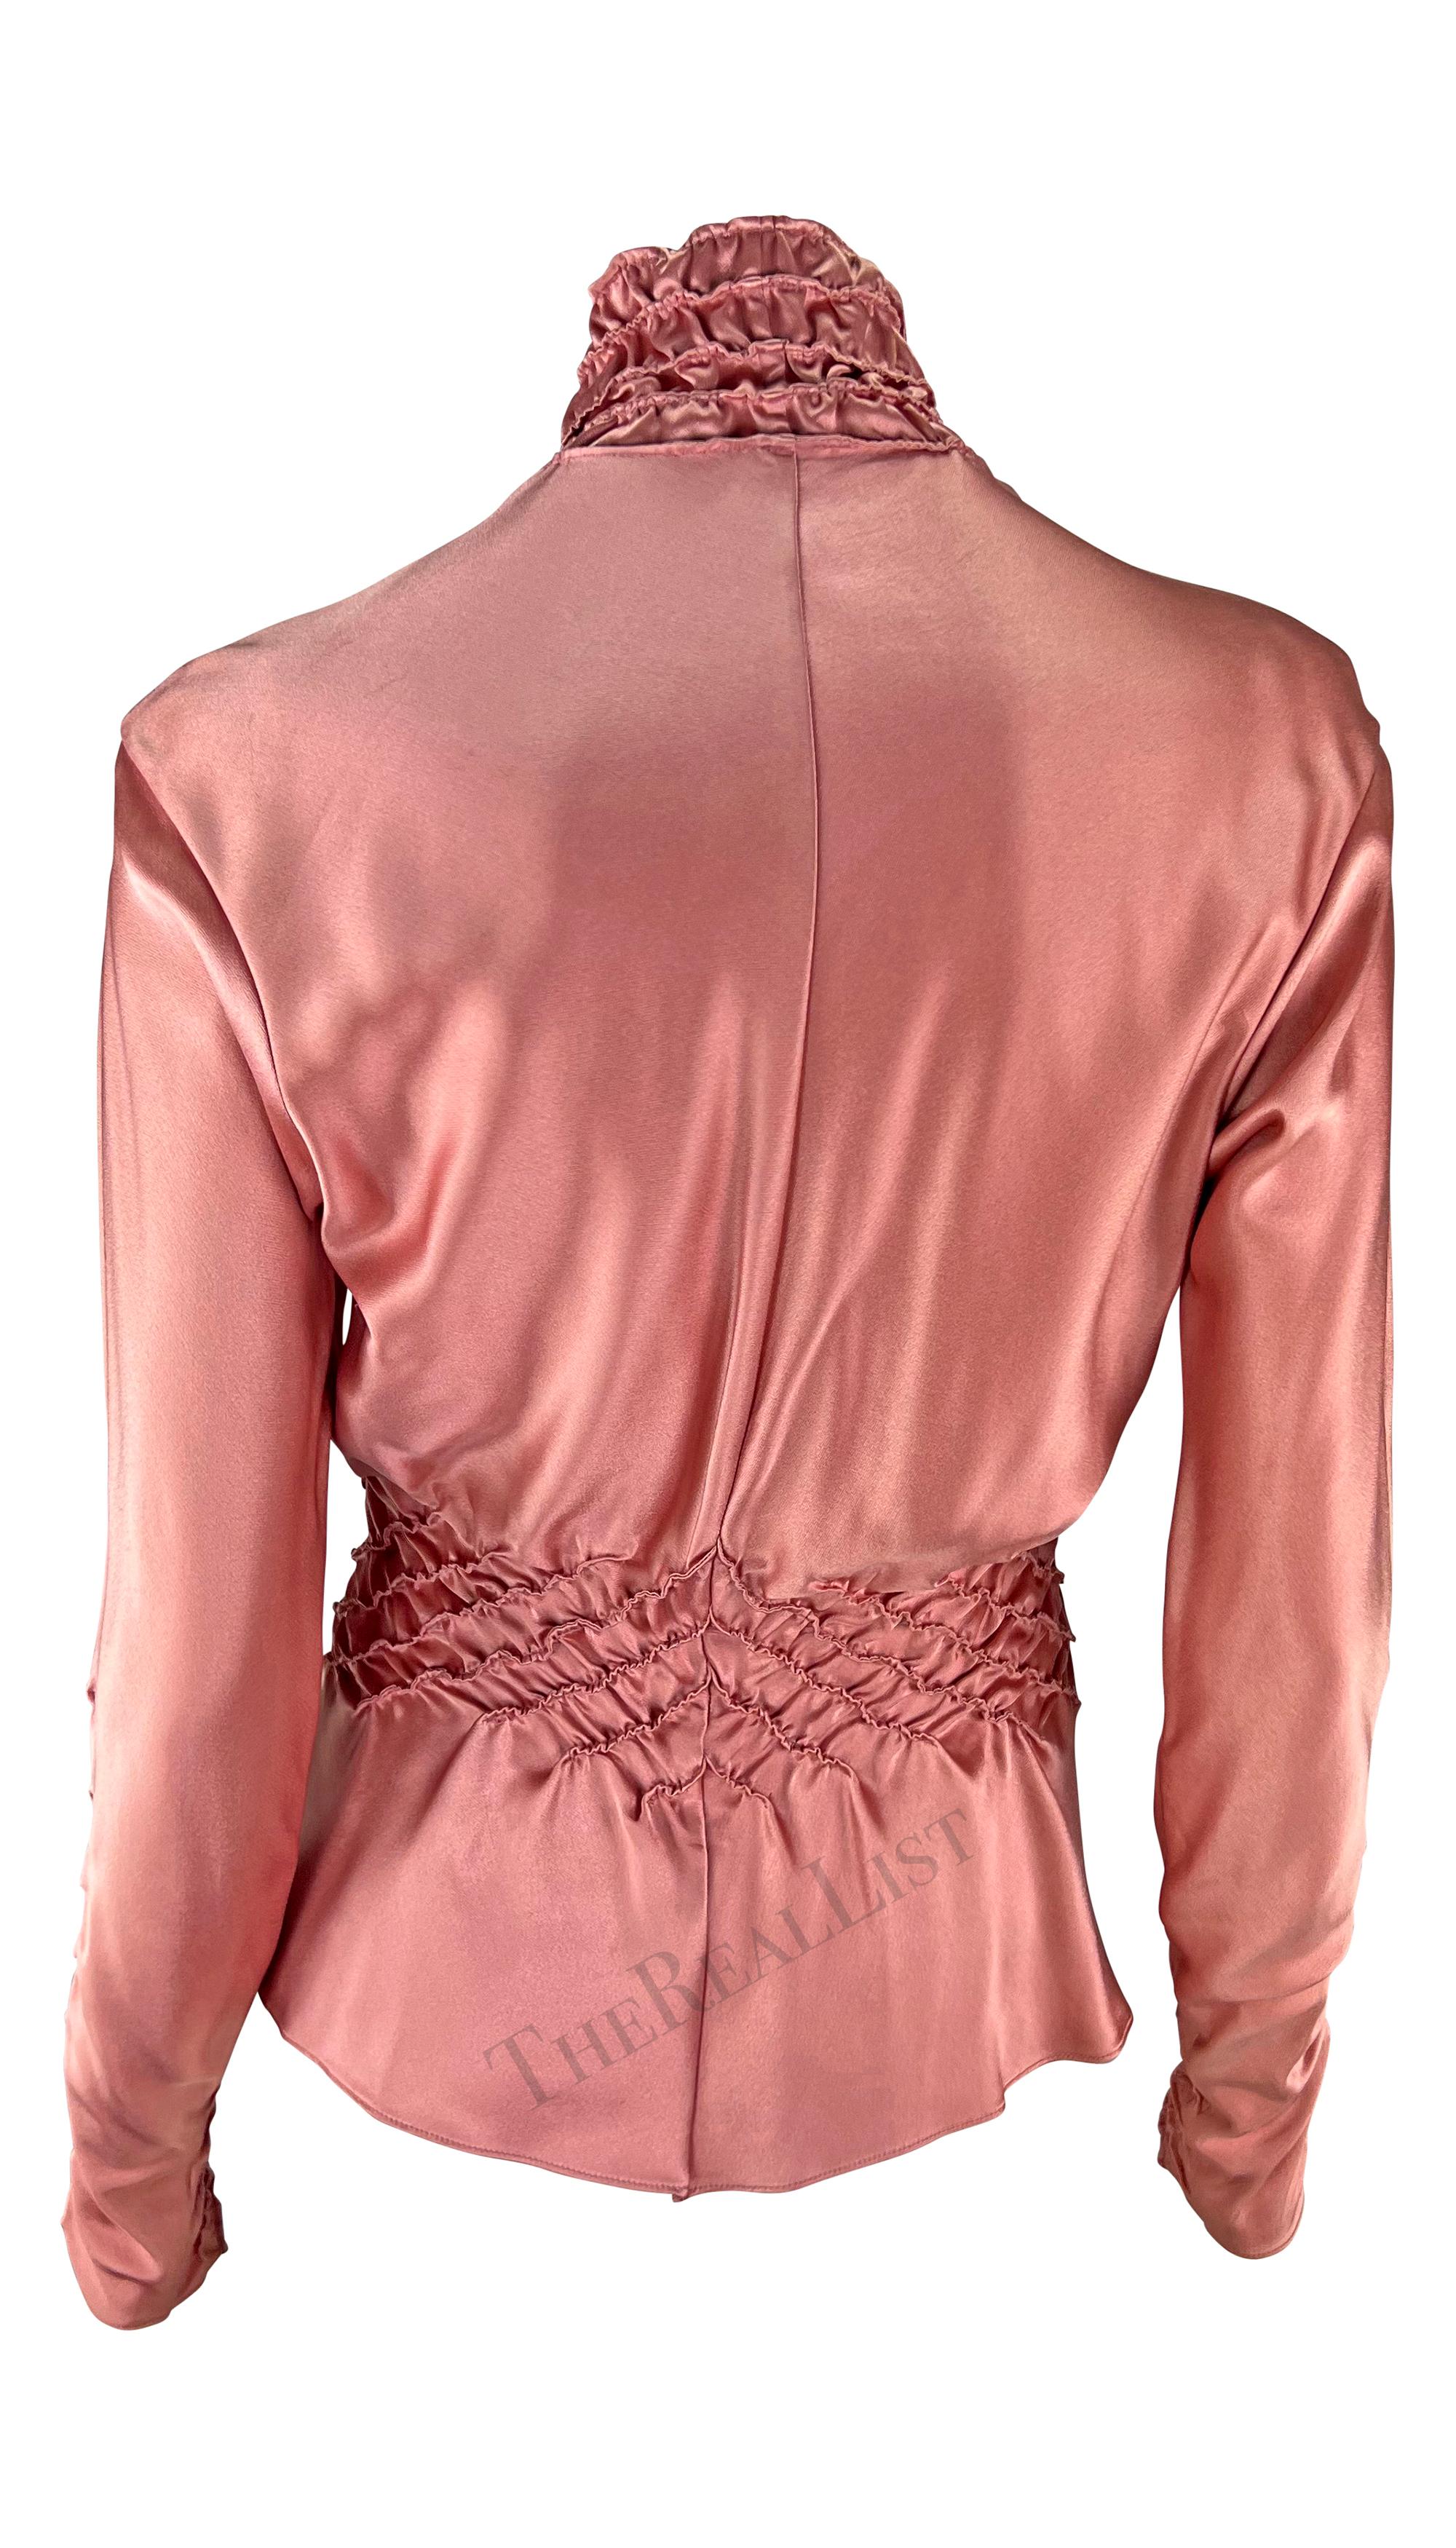 F/W 2001 Yves Saint Laurent by Tom Ford Pink Silk Satin Ruched Long Sleeve Top 3